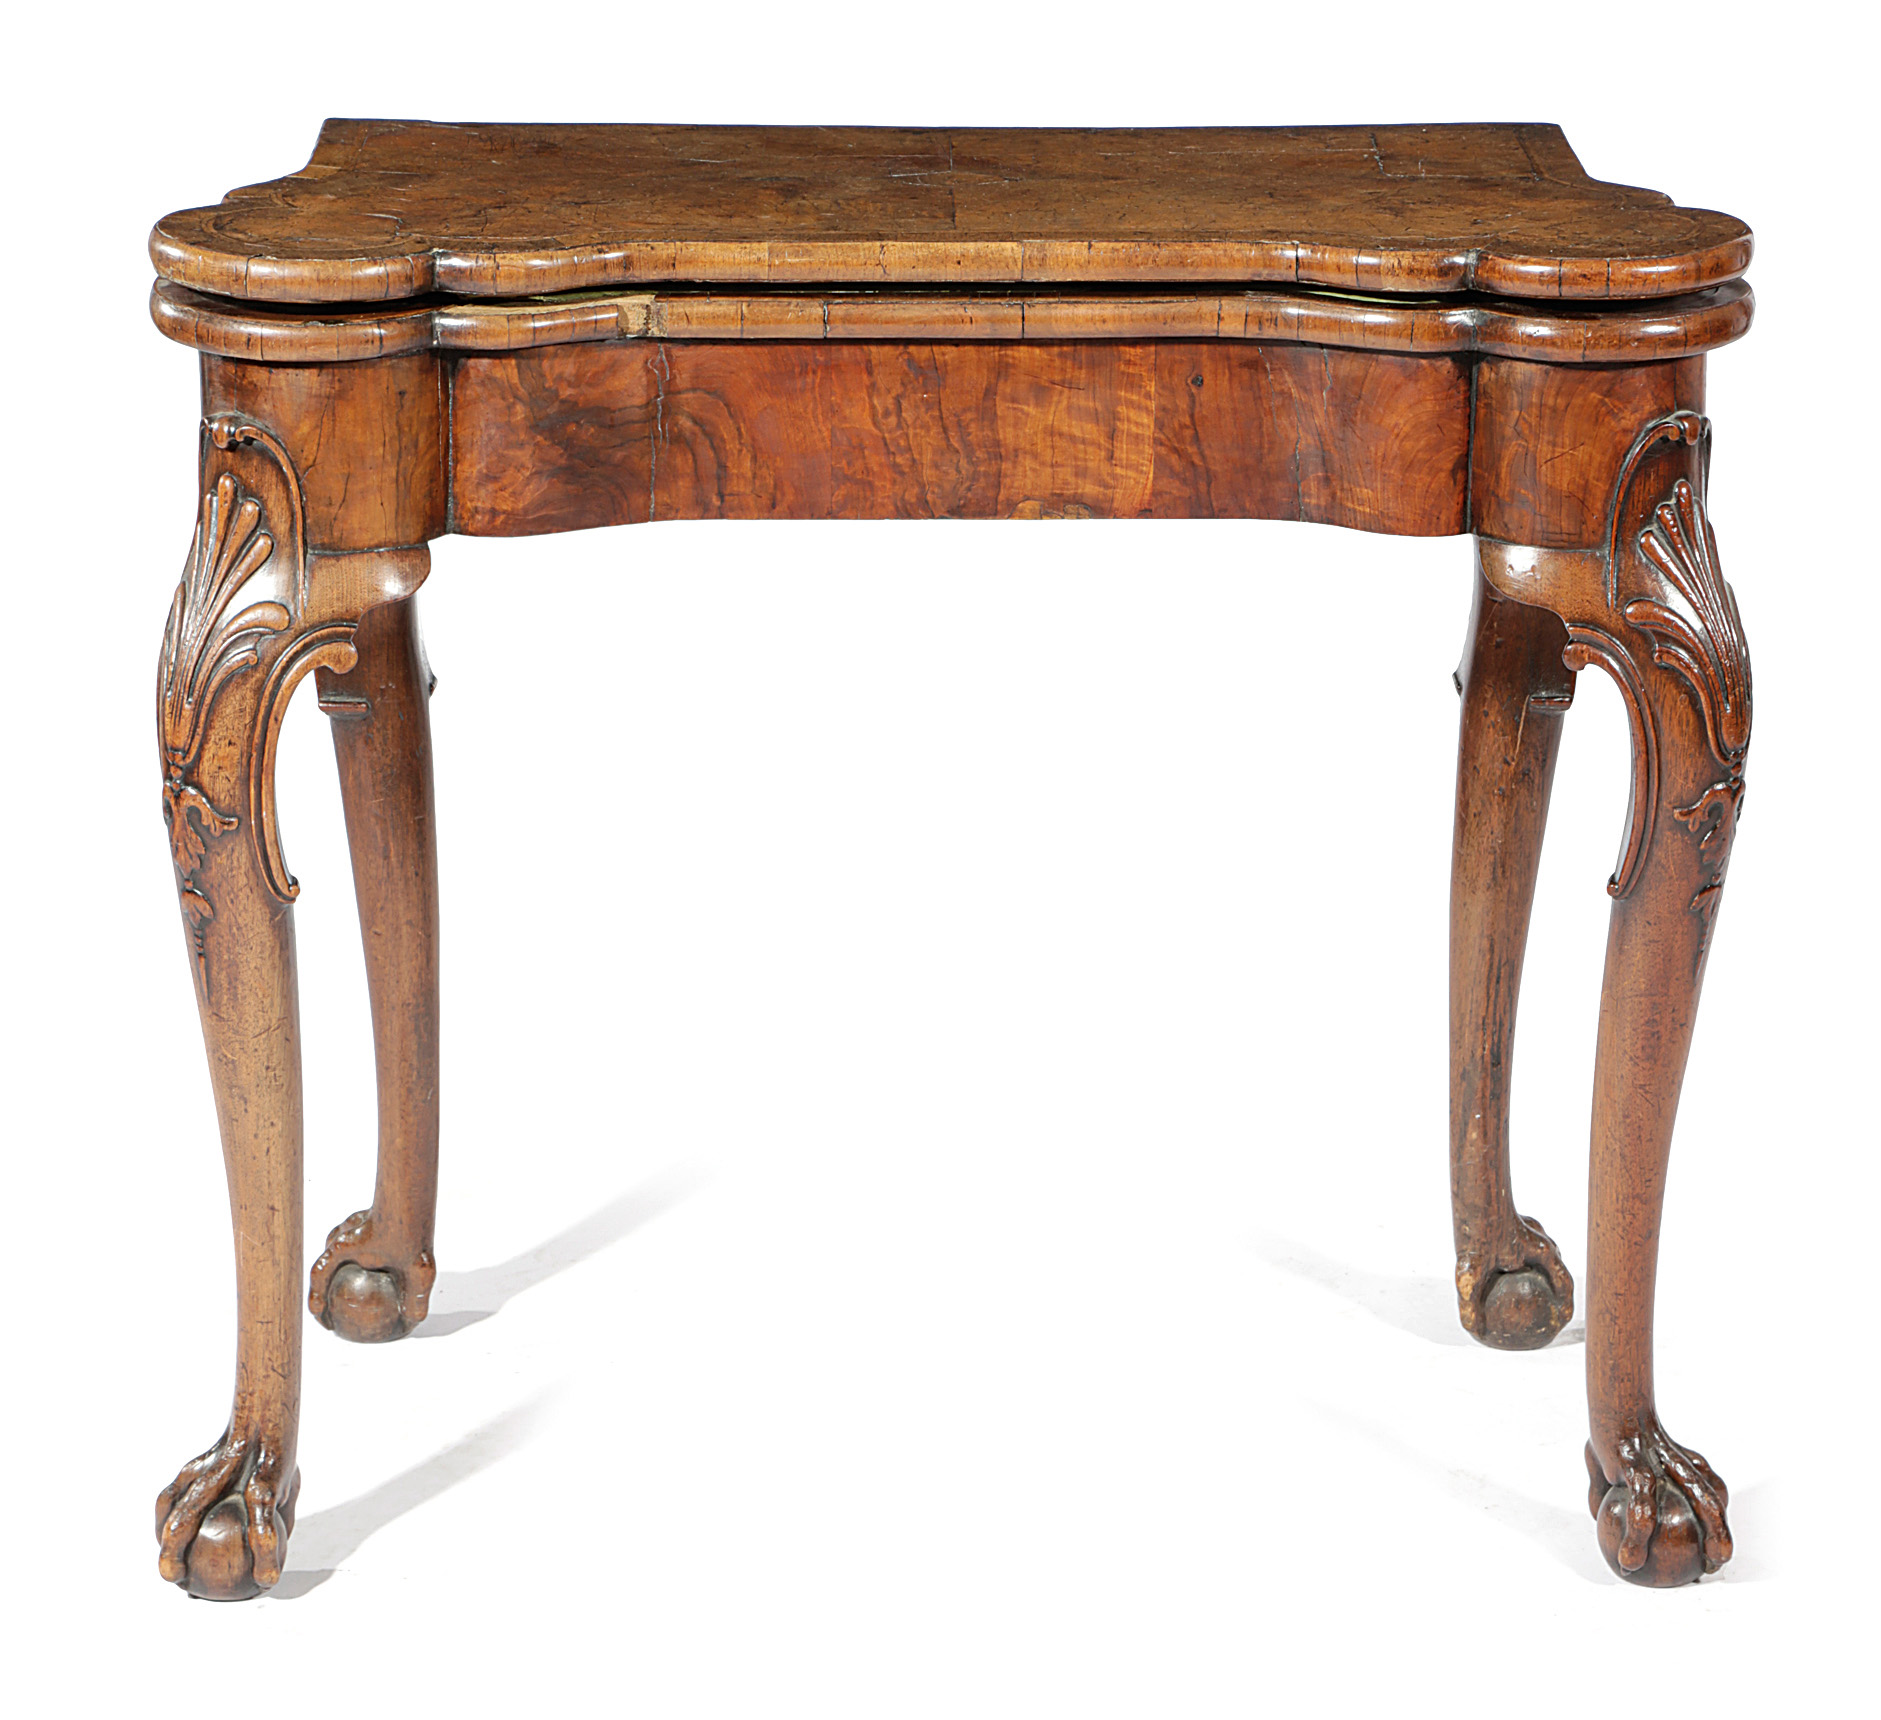 A GEORGE II WALNUT CONCERTINA ACTION CARD TABLE IN THE MANNER OF BENJAMIN CROOK, C.1735 the